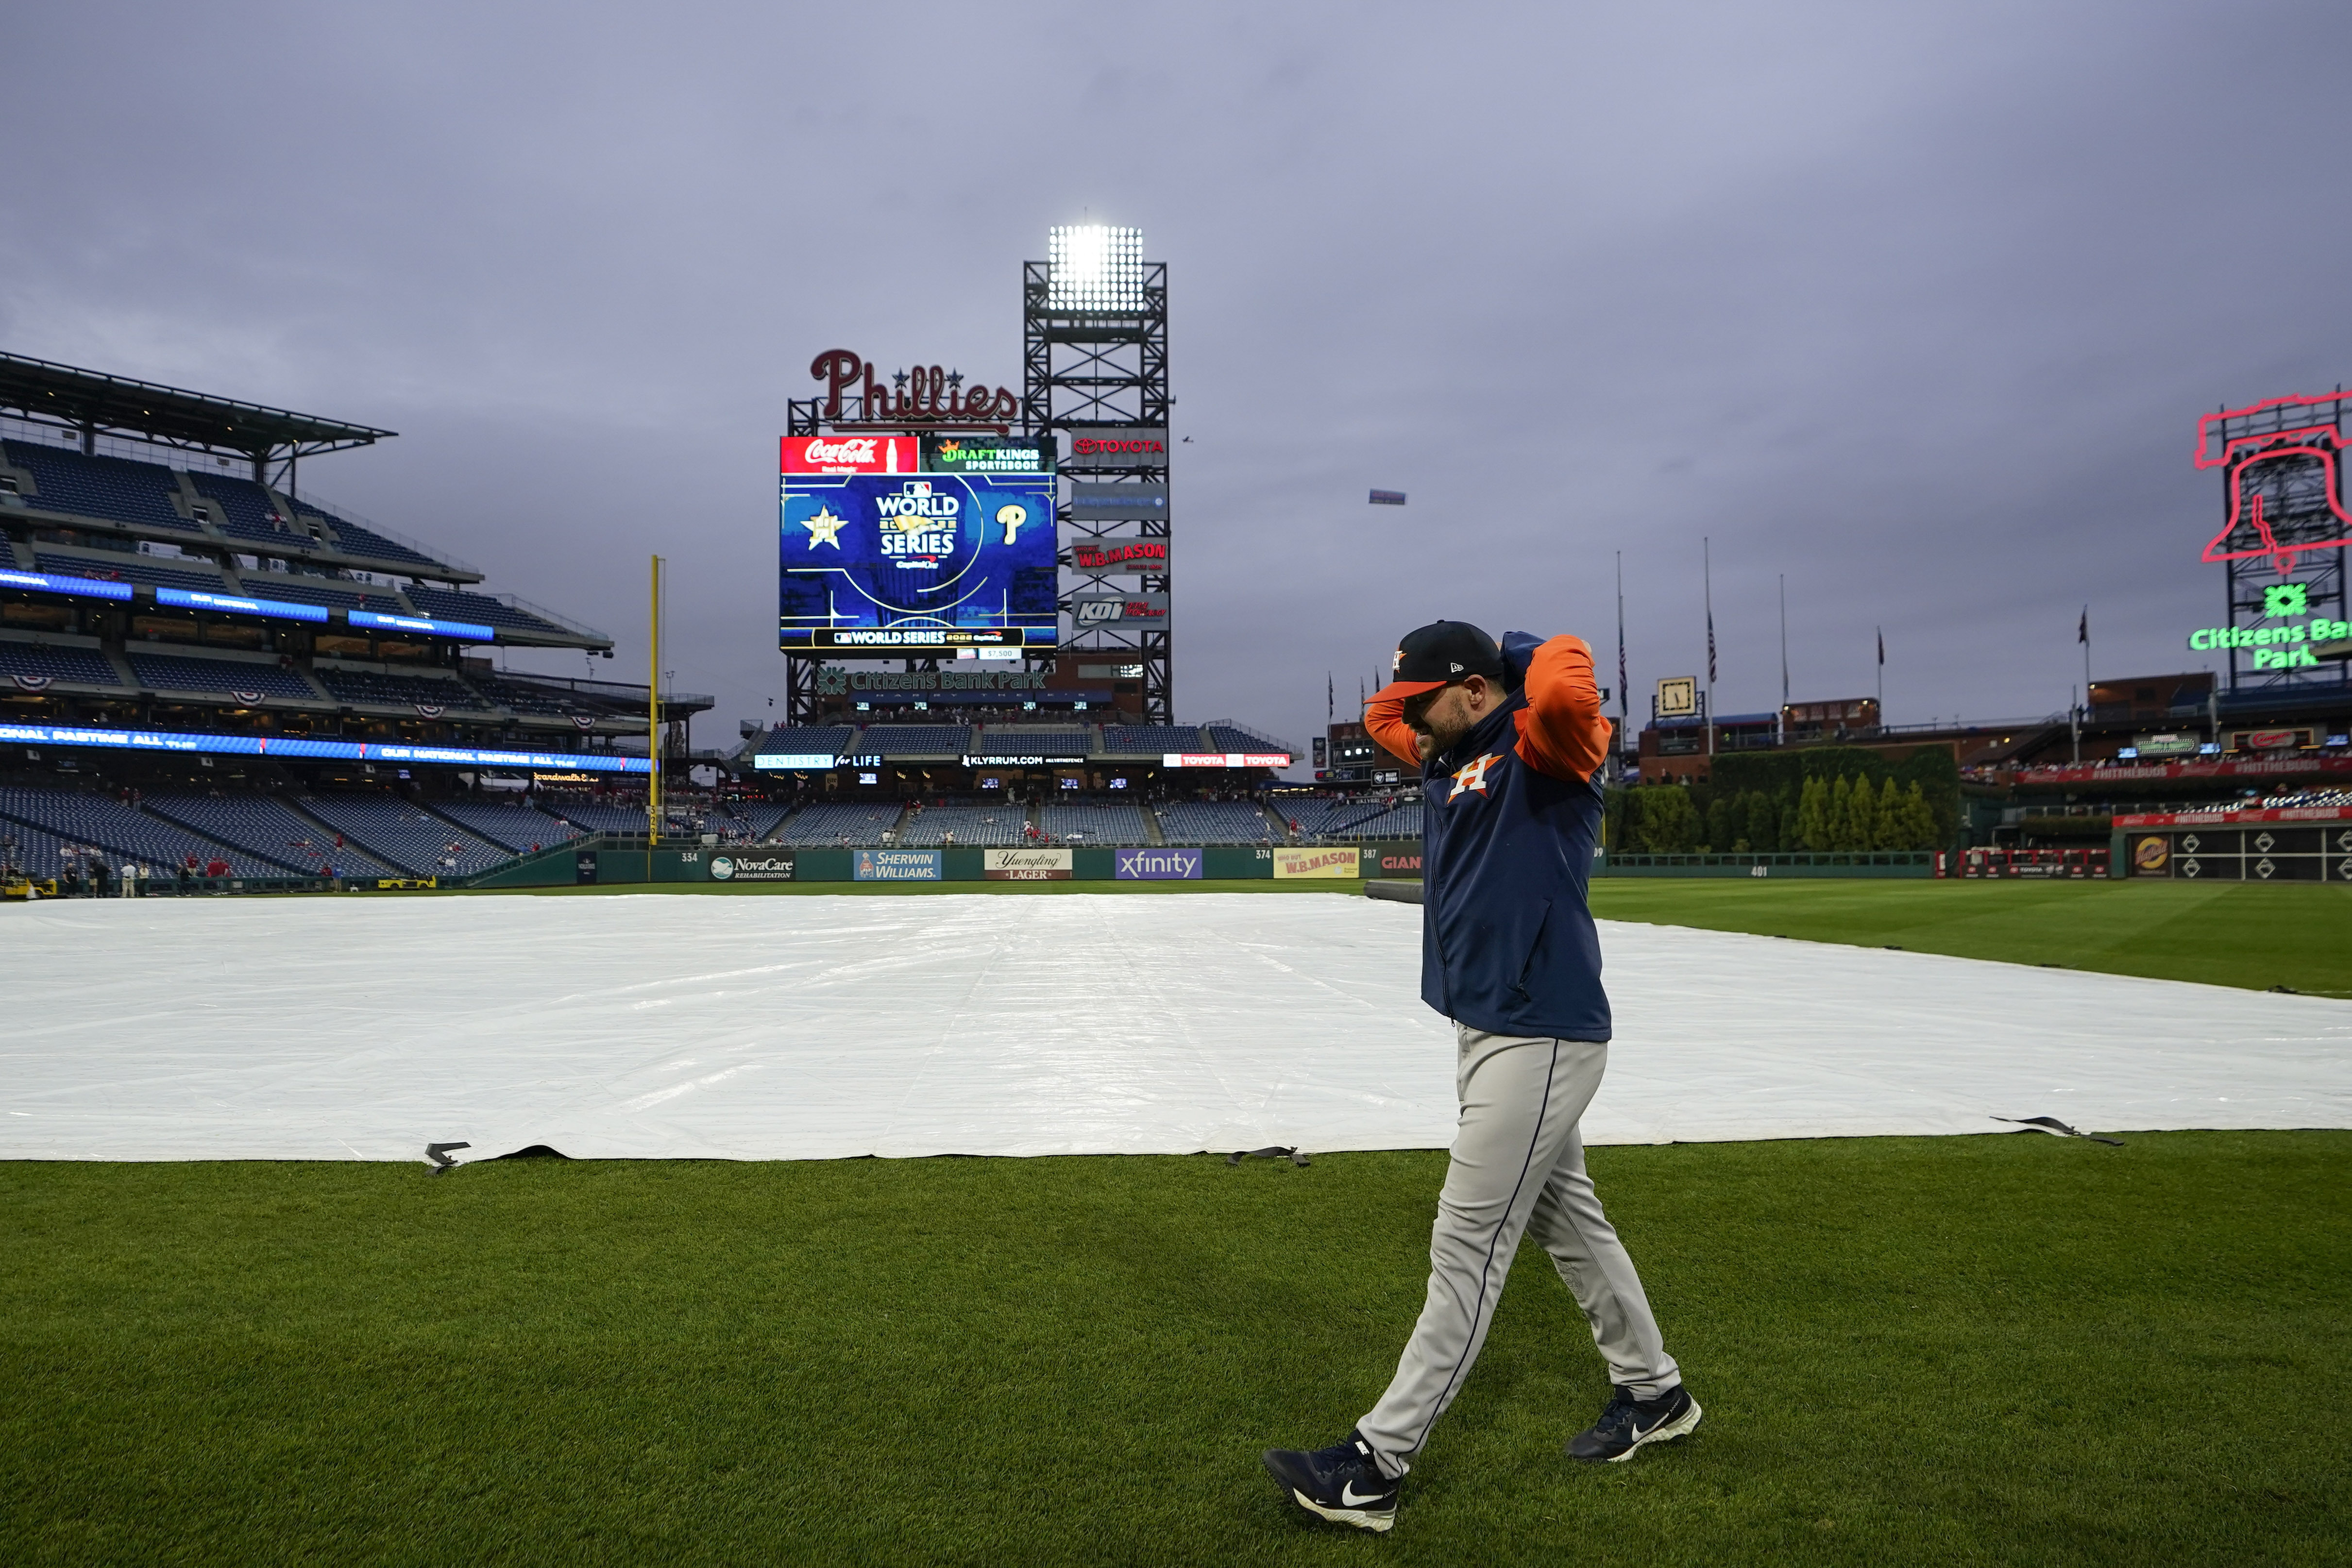 Houston Astros left fielder Chas McCormick walks in the field before Game 3 of baseball's World Series between the Houston Astros and the Philadelphia Phillies on Monday, Oct. 31, 2022, in Philadelphia. The game was postponed by rain Monday night with the matchup tied 1-1.